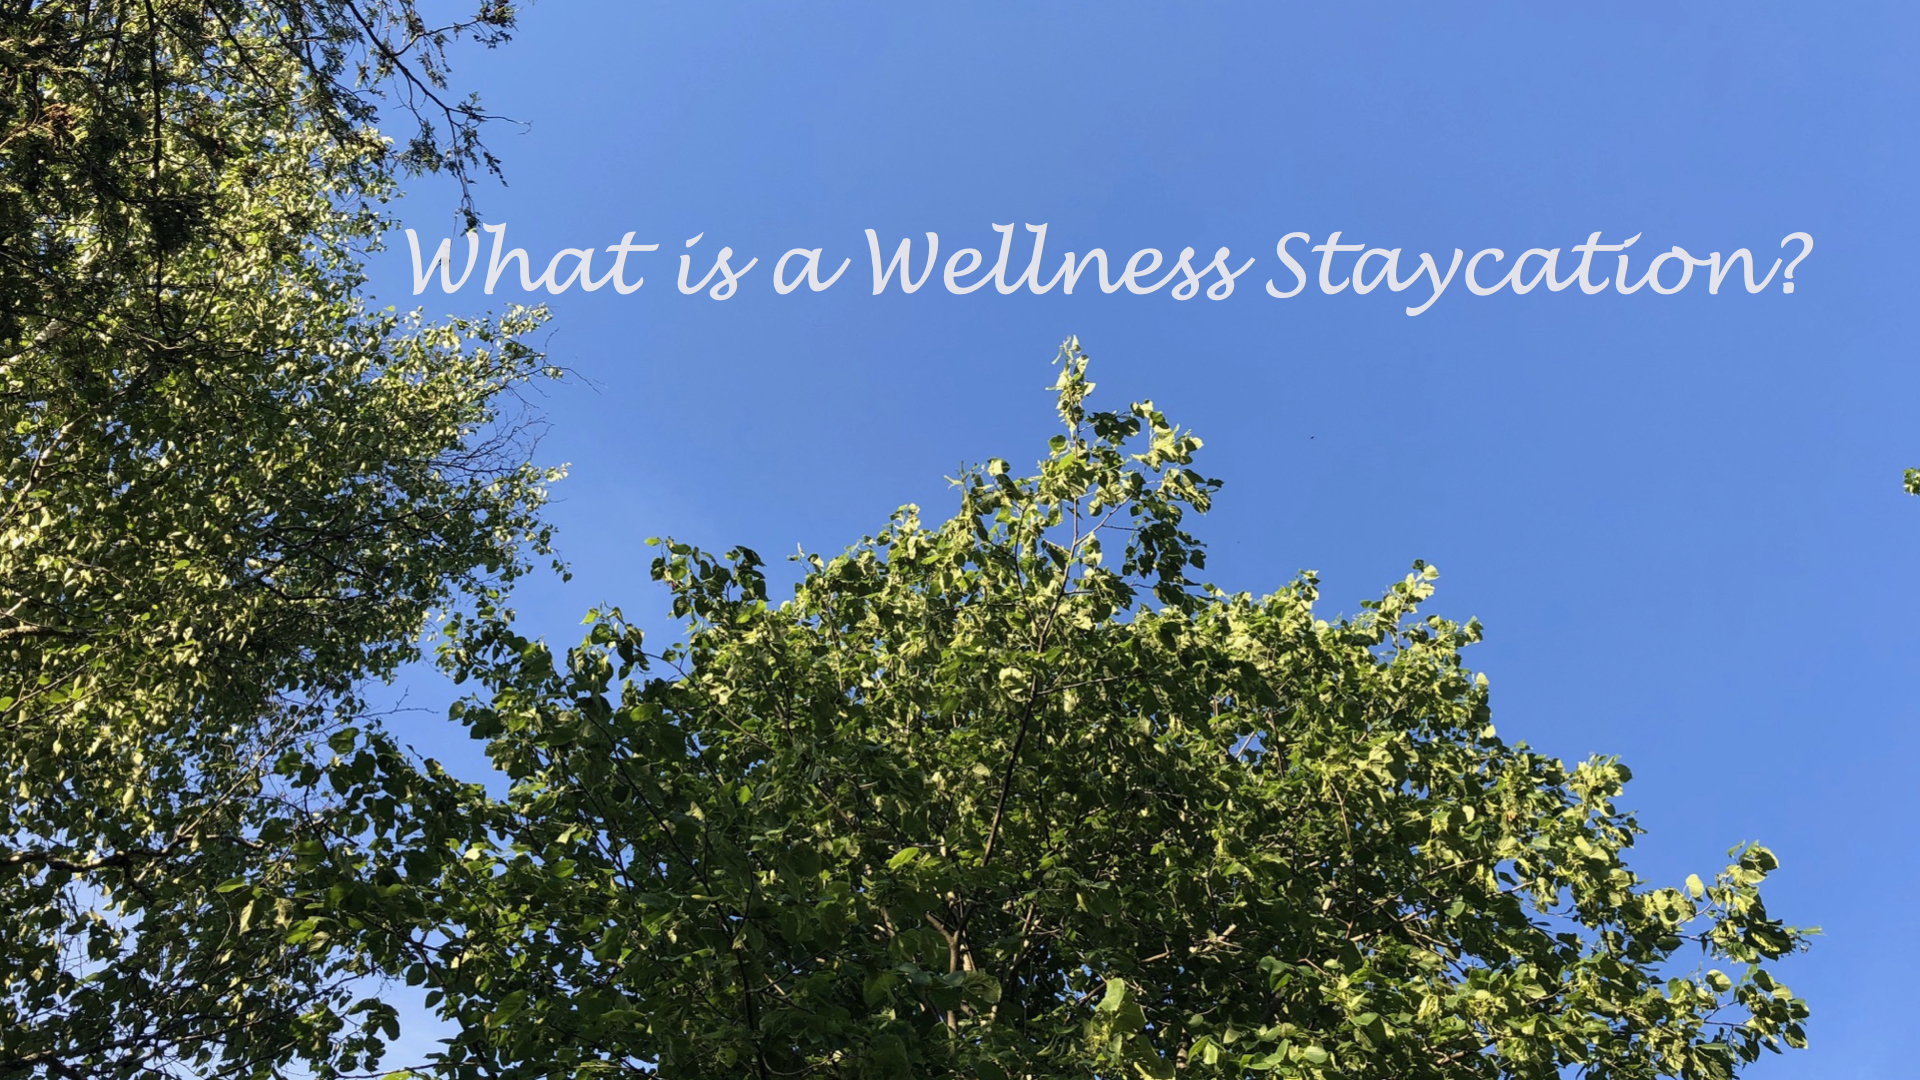 What is a Wellness Staycation